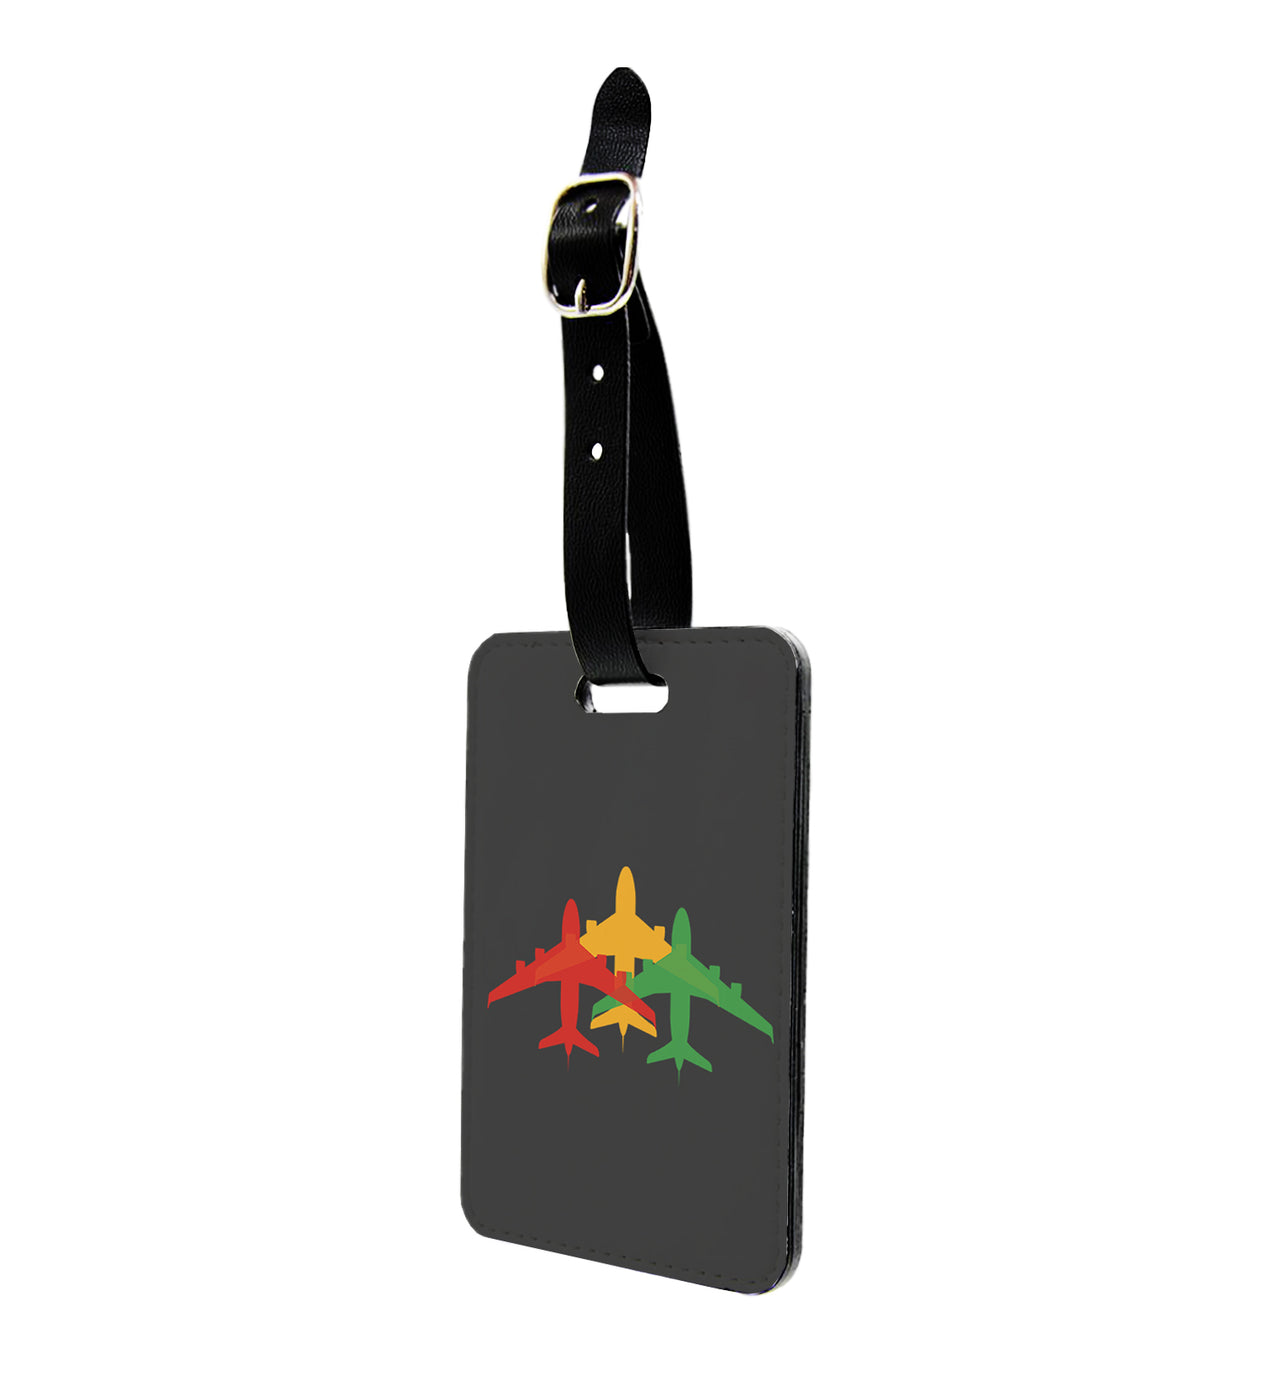 Colourful 3 Airplanes Designed Luggage Tag